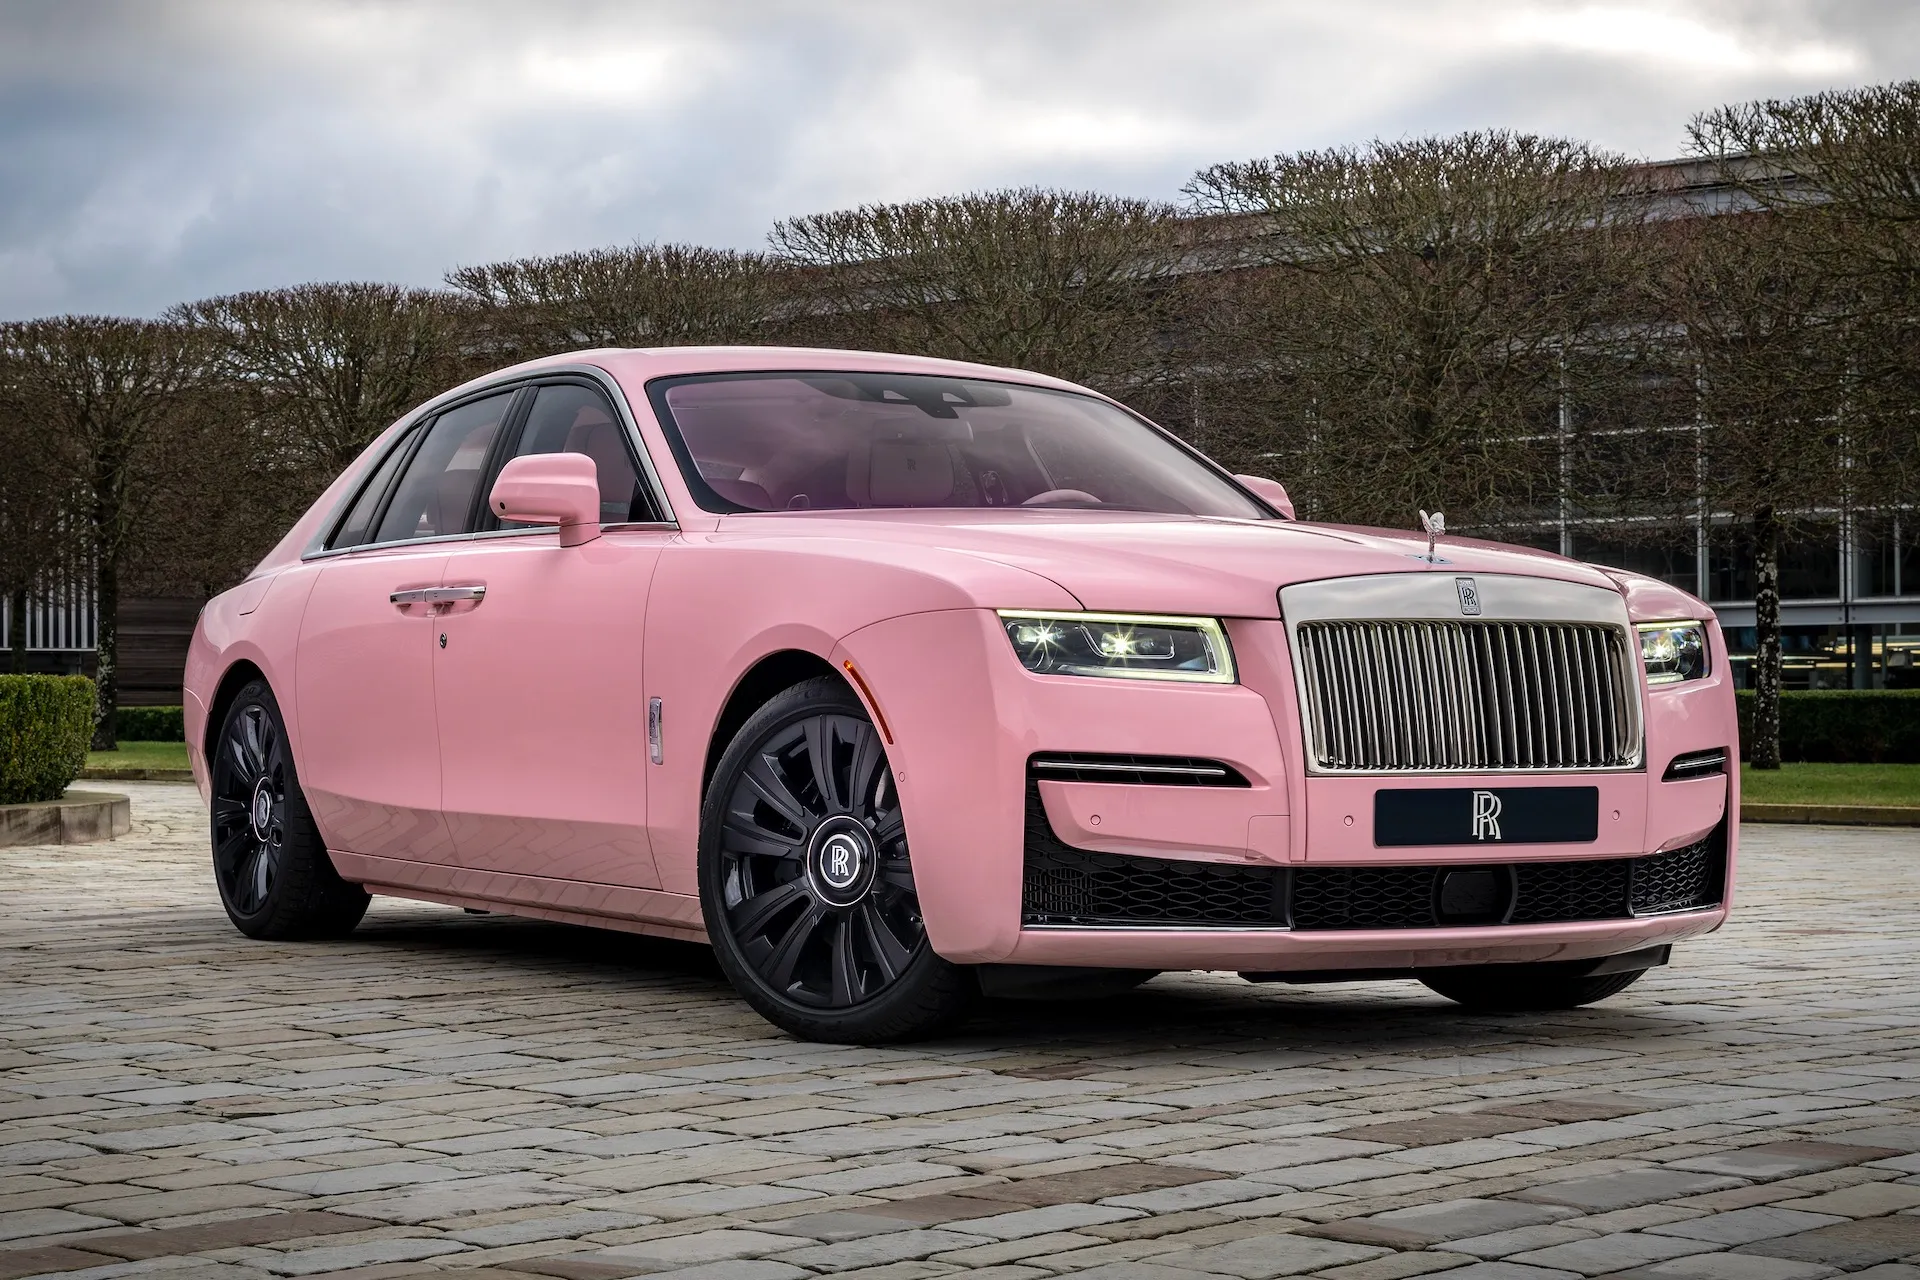 New oneoff bespoke Champagne Rose RollsRoyce Ghost revealed